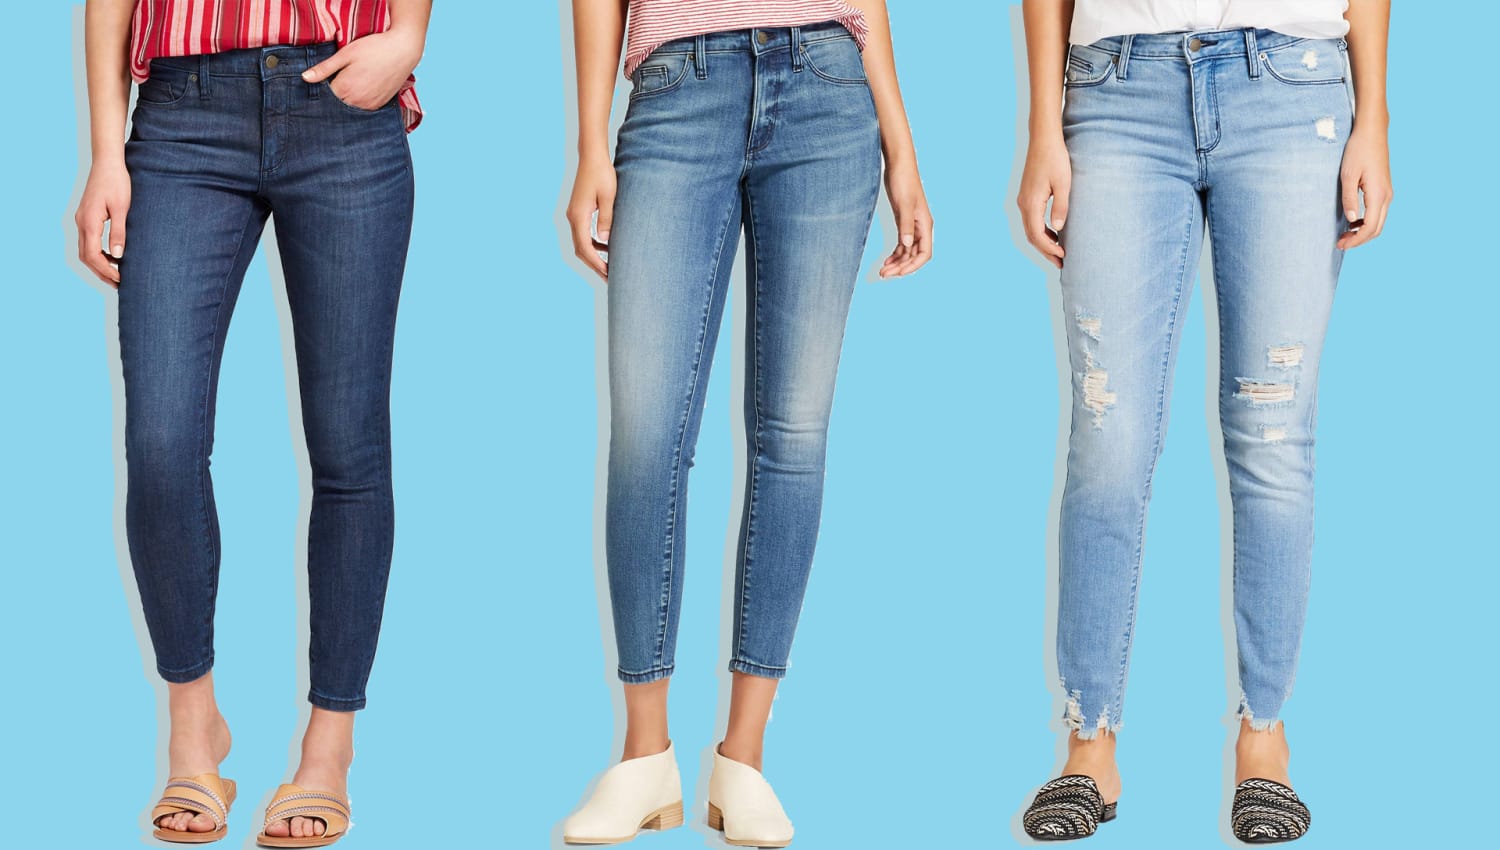 Target launches new a denim line called Universal Thread